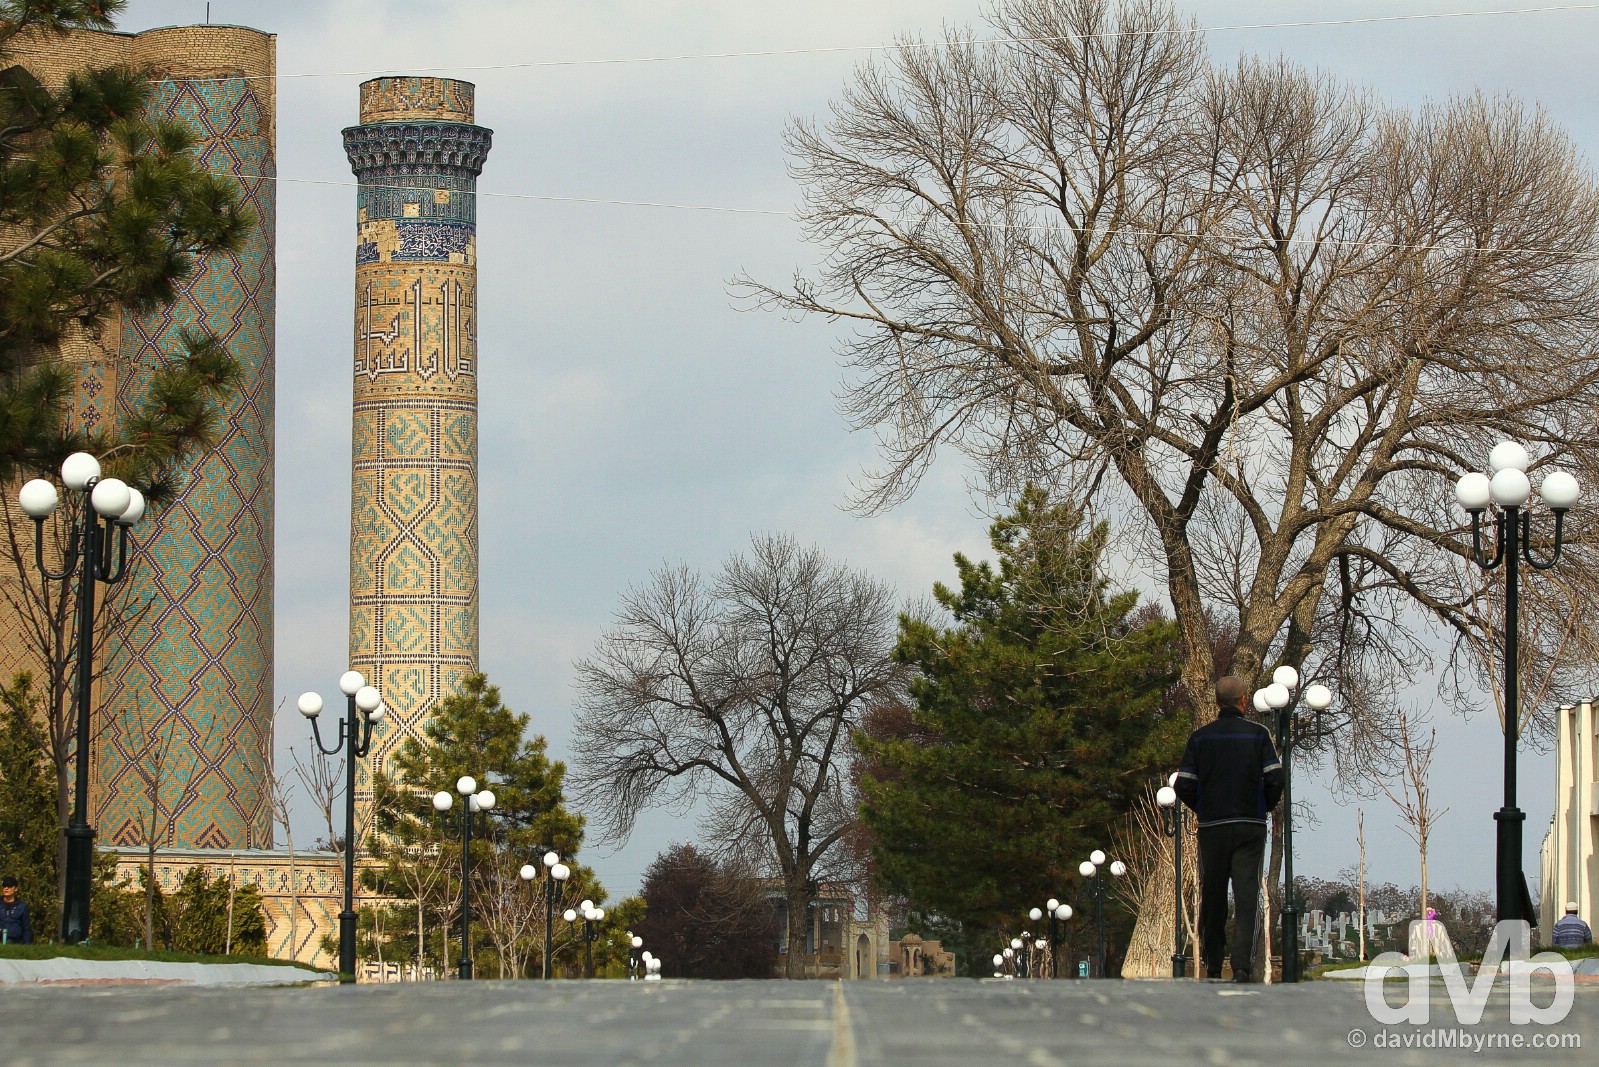 The new thoroughfare of Toshkent in the 'new' Samarkand, Uzbekistan. March 8, 2015.